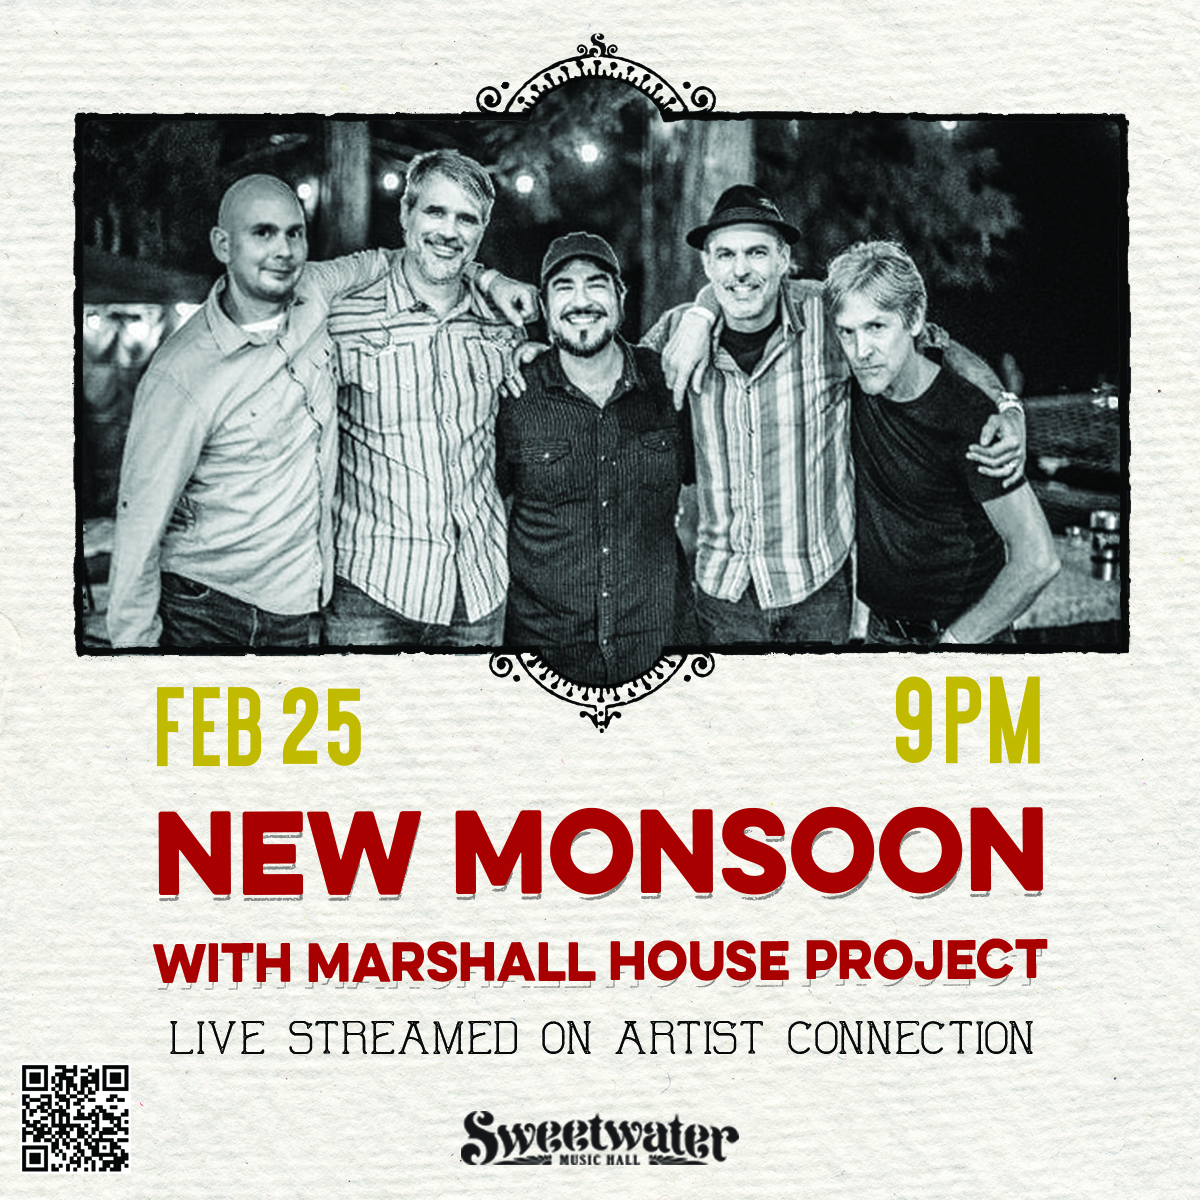 New Monsoon and the Marshall House Project are performing from the Sweetwater Music Hall this Friday at 9 pm! Come our live stream of the event on Artist Connection and enjoy the sounds of free-flying rock, acoustic stylings and tight vocal harmony. 

bit.ly/3kagIQj